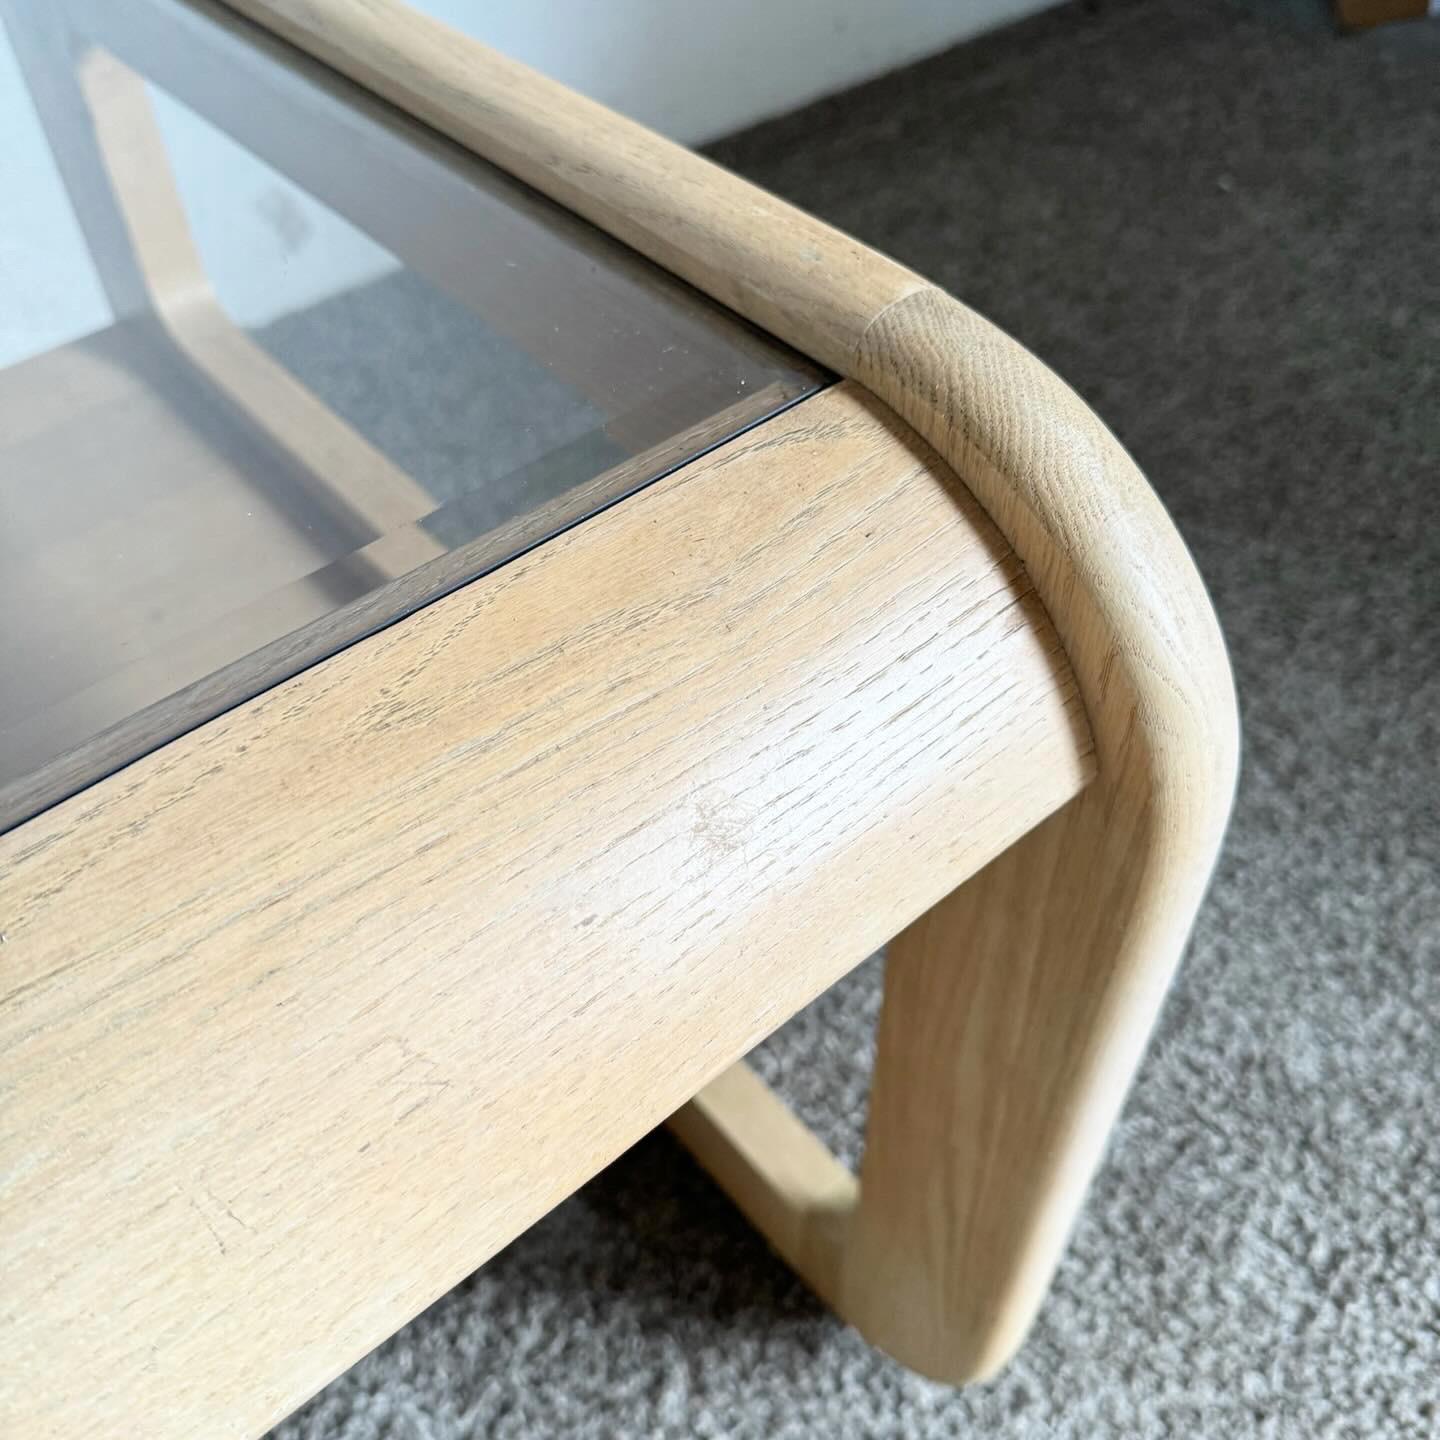 Experience the blend of vintage charm and modern design with the Mid Century Modern Oak Side Table by Lou Hodges. This table features a sturdy oak frame with a natural finish, embodying the clean lines of Mid Century Modern aesthetics. The smoked